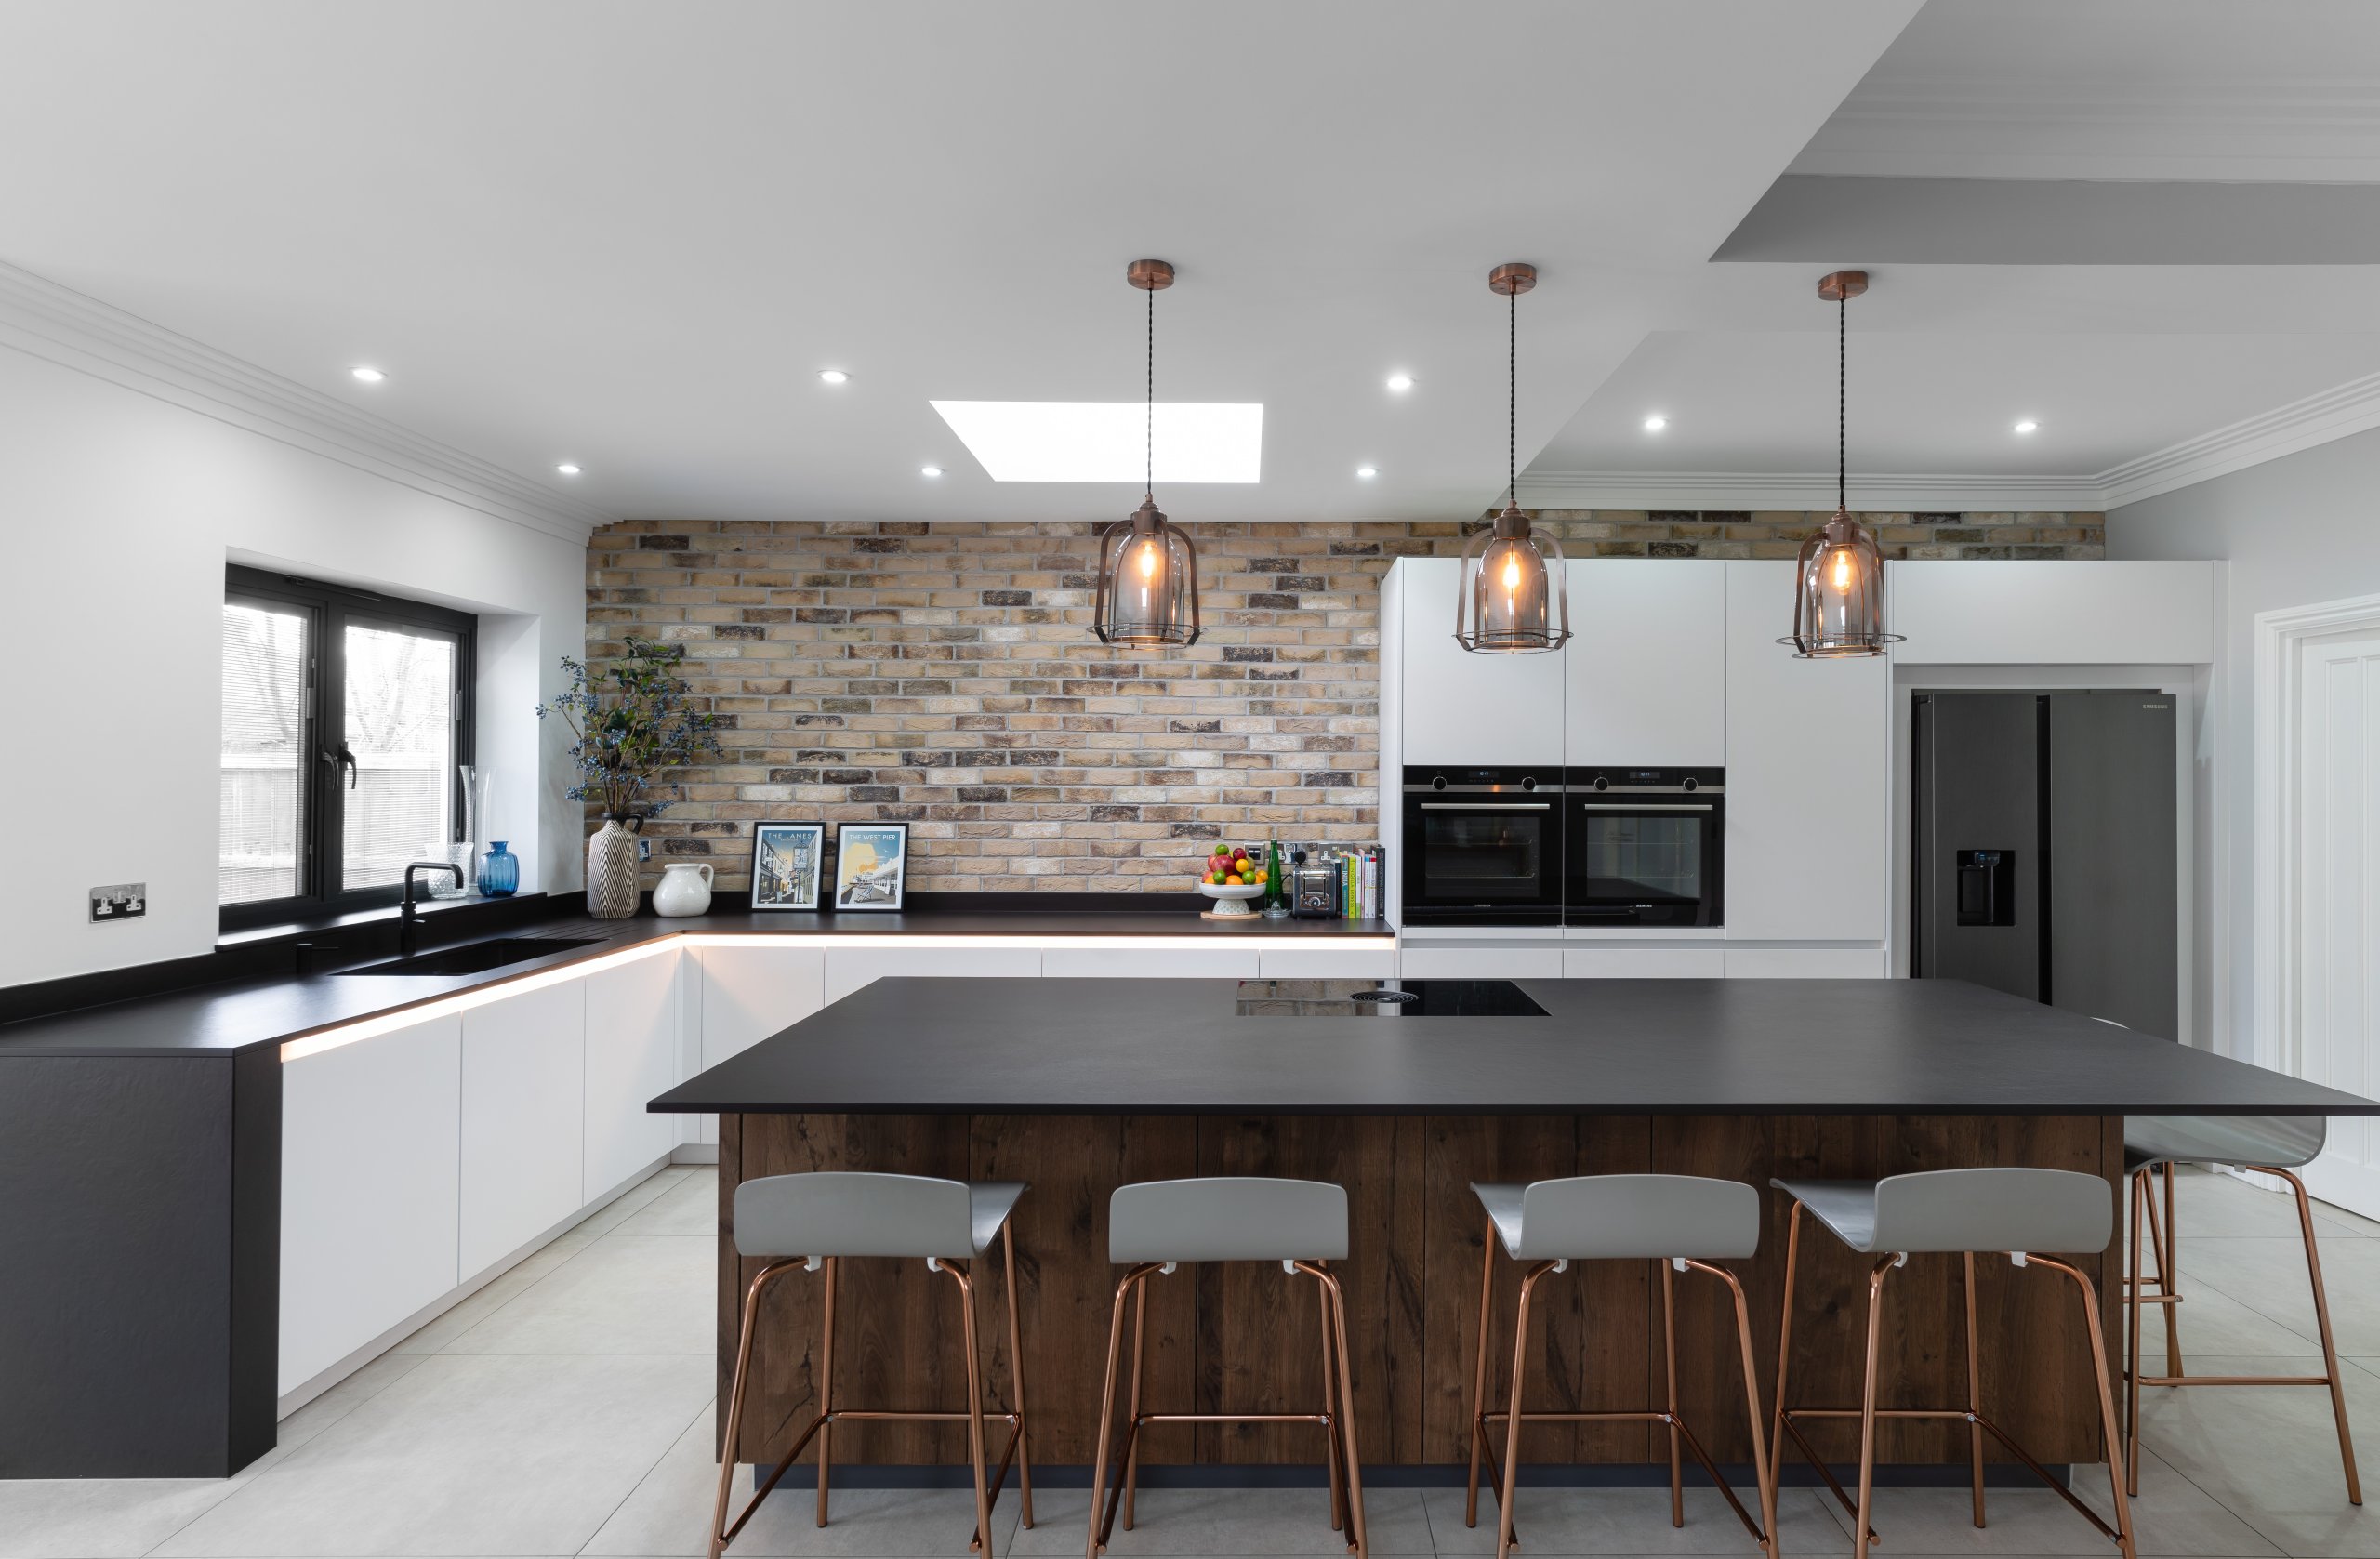 Modern kitchen with exposed brickwork and industrial details